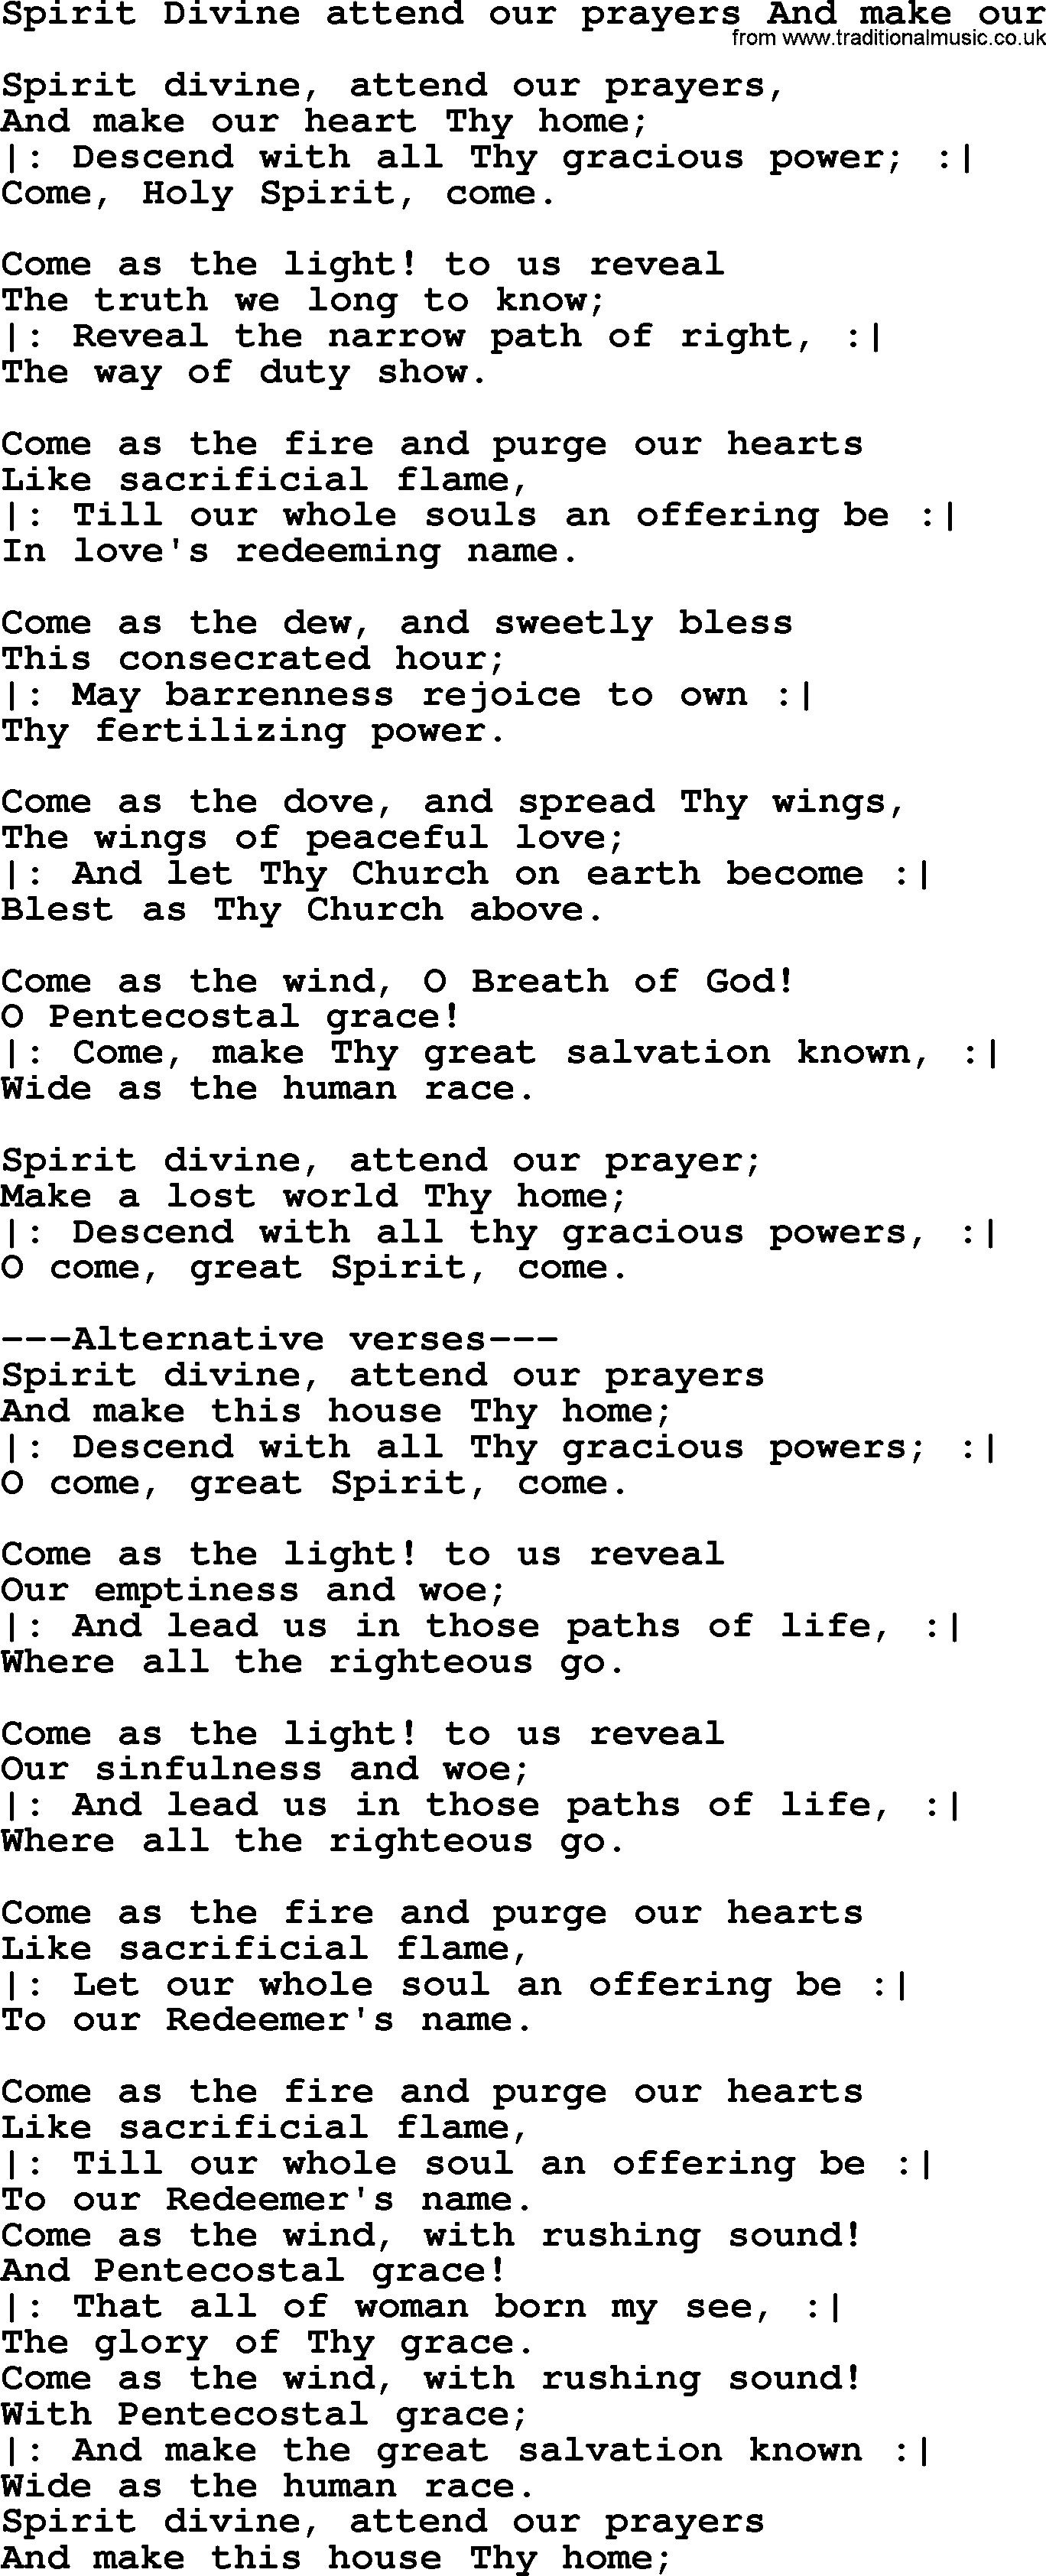 Sacred Songs and Solos complete, 1200 Hymns, title: Spirit Divine Attend Our Prayers And Make Our, lyrics and PDF